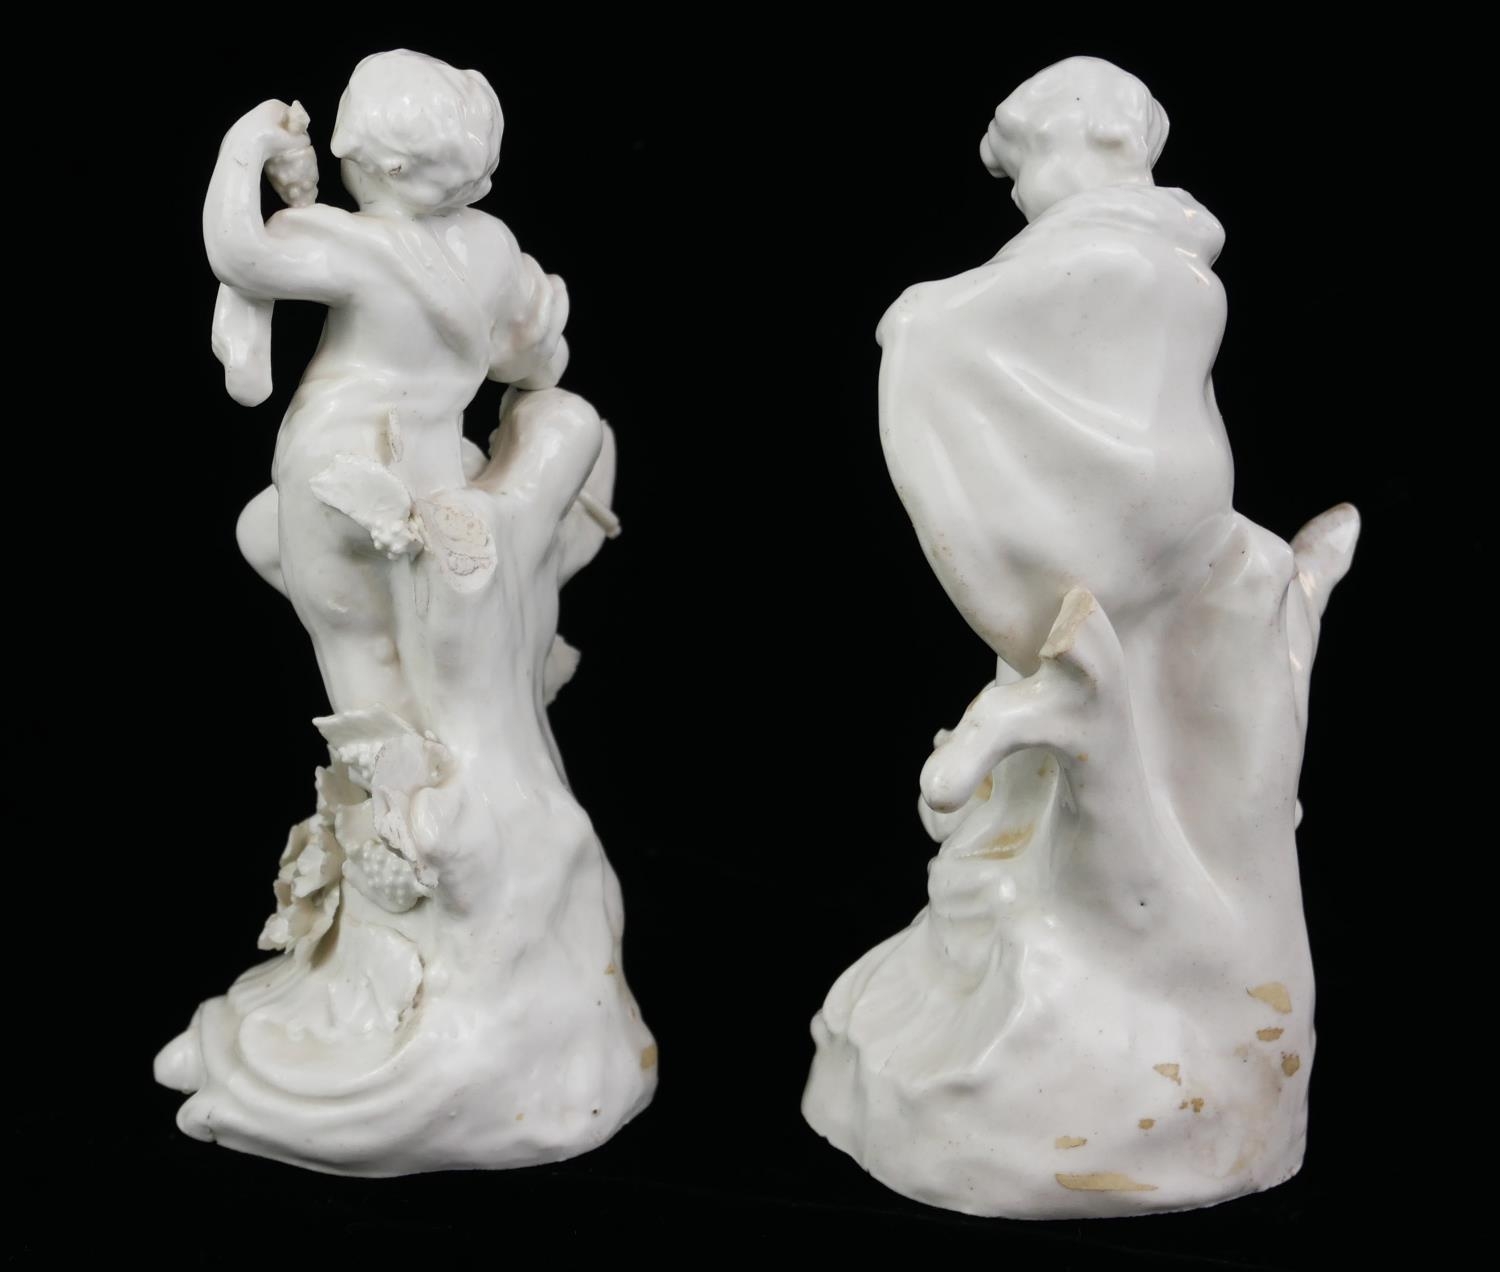 A PAIR OF RARE PLYMOTH 18TH CENTURY HARD PASTE BLANC DE CHINE PORCELAIN MODELS OF ALLEGORICAL - Image 2 of 7